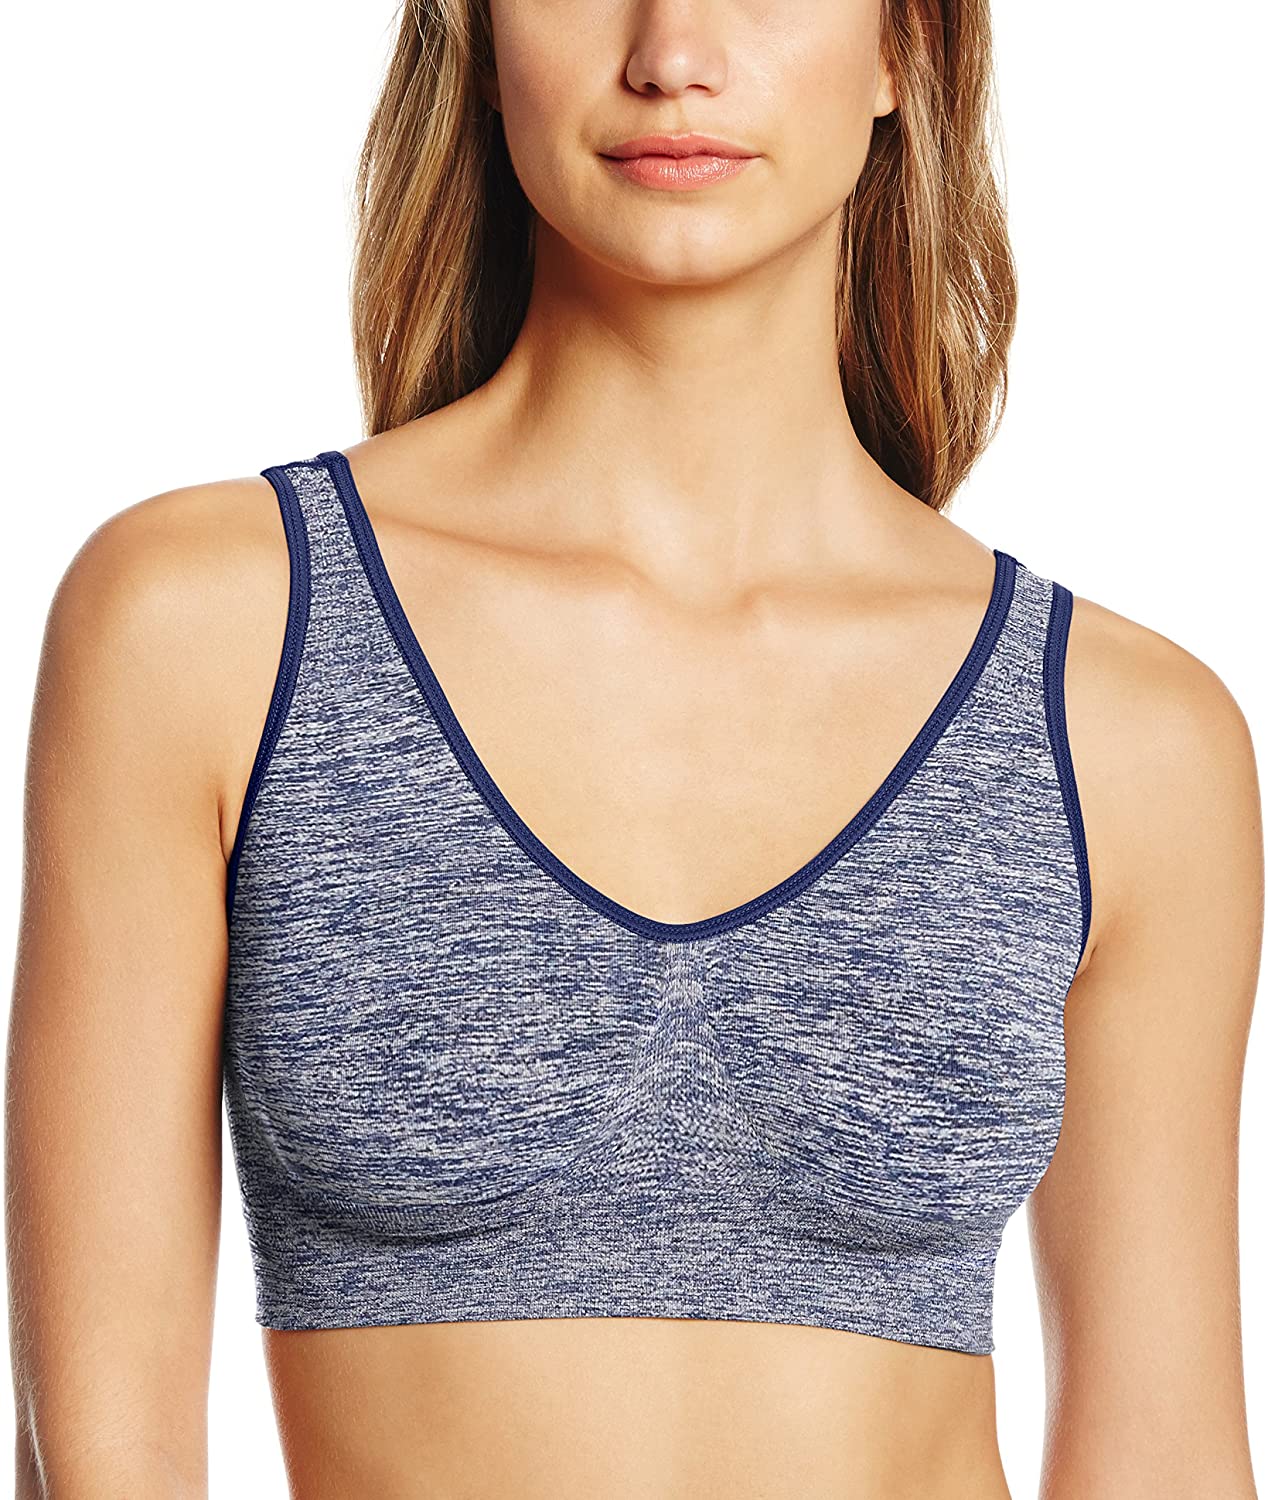 Womens Cozy Comfort Flex Fit Seamless and Wirefree Bra, Style MHG196 #Ad  #Flex, #Affiliate, #Fit, #Comfort